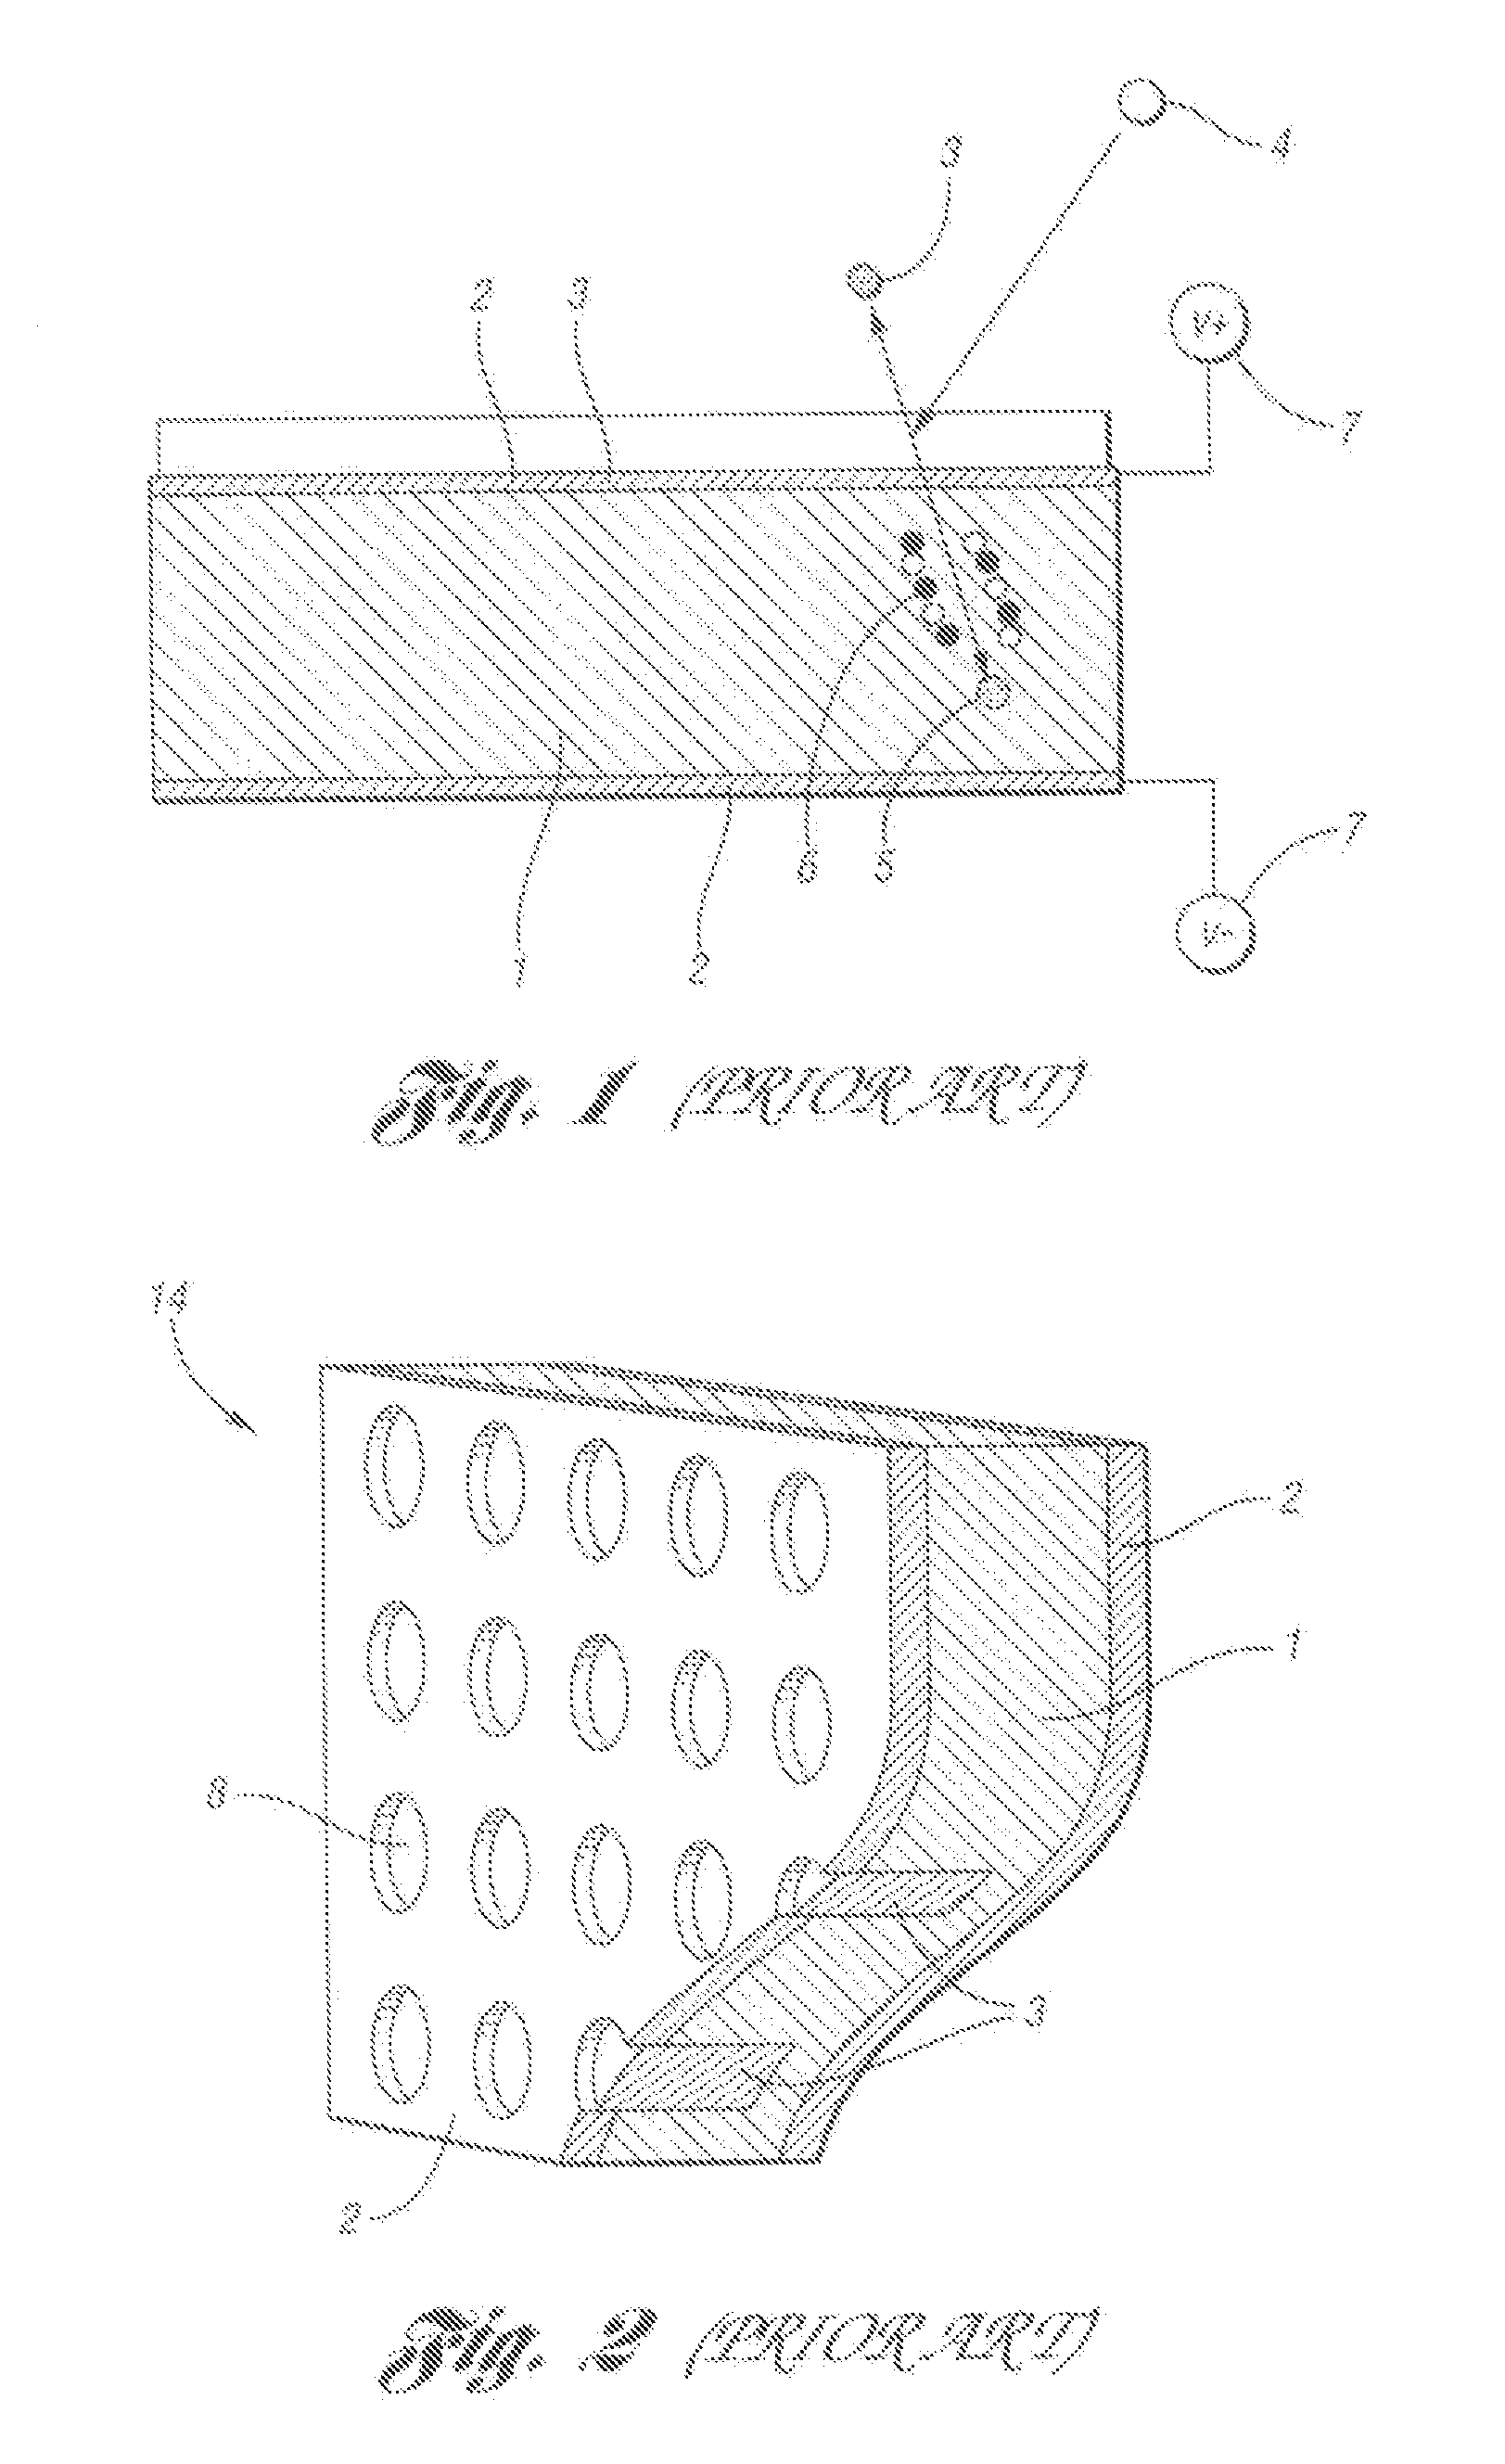 Non-streaming high-efficiency perforated semiconductor neutron detectors, methods of making same and measuring wand and detector modules utilzing same